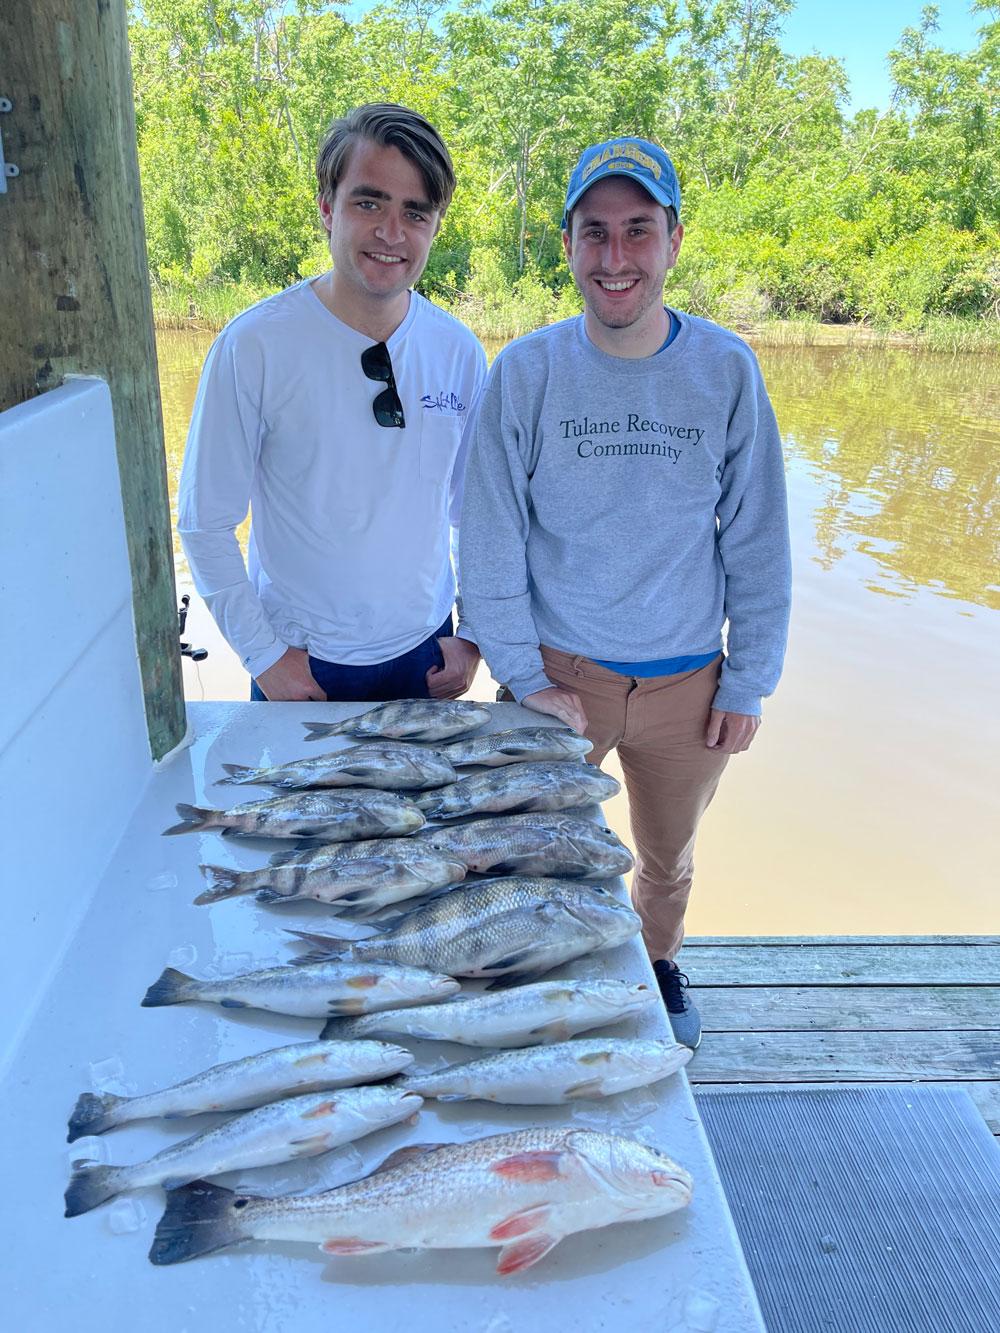 Two students smiling next to caught fish